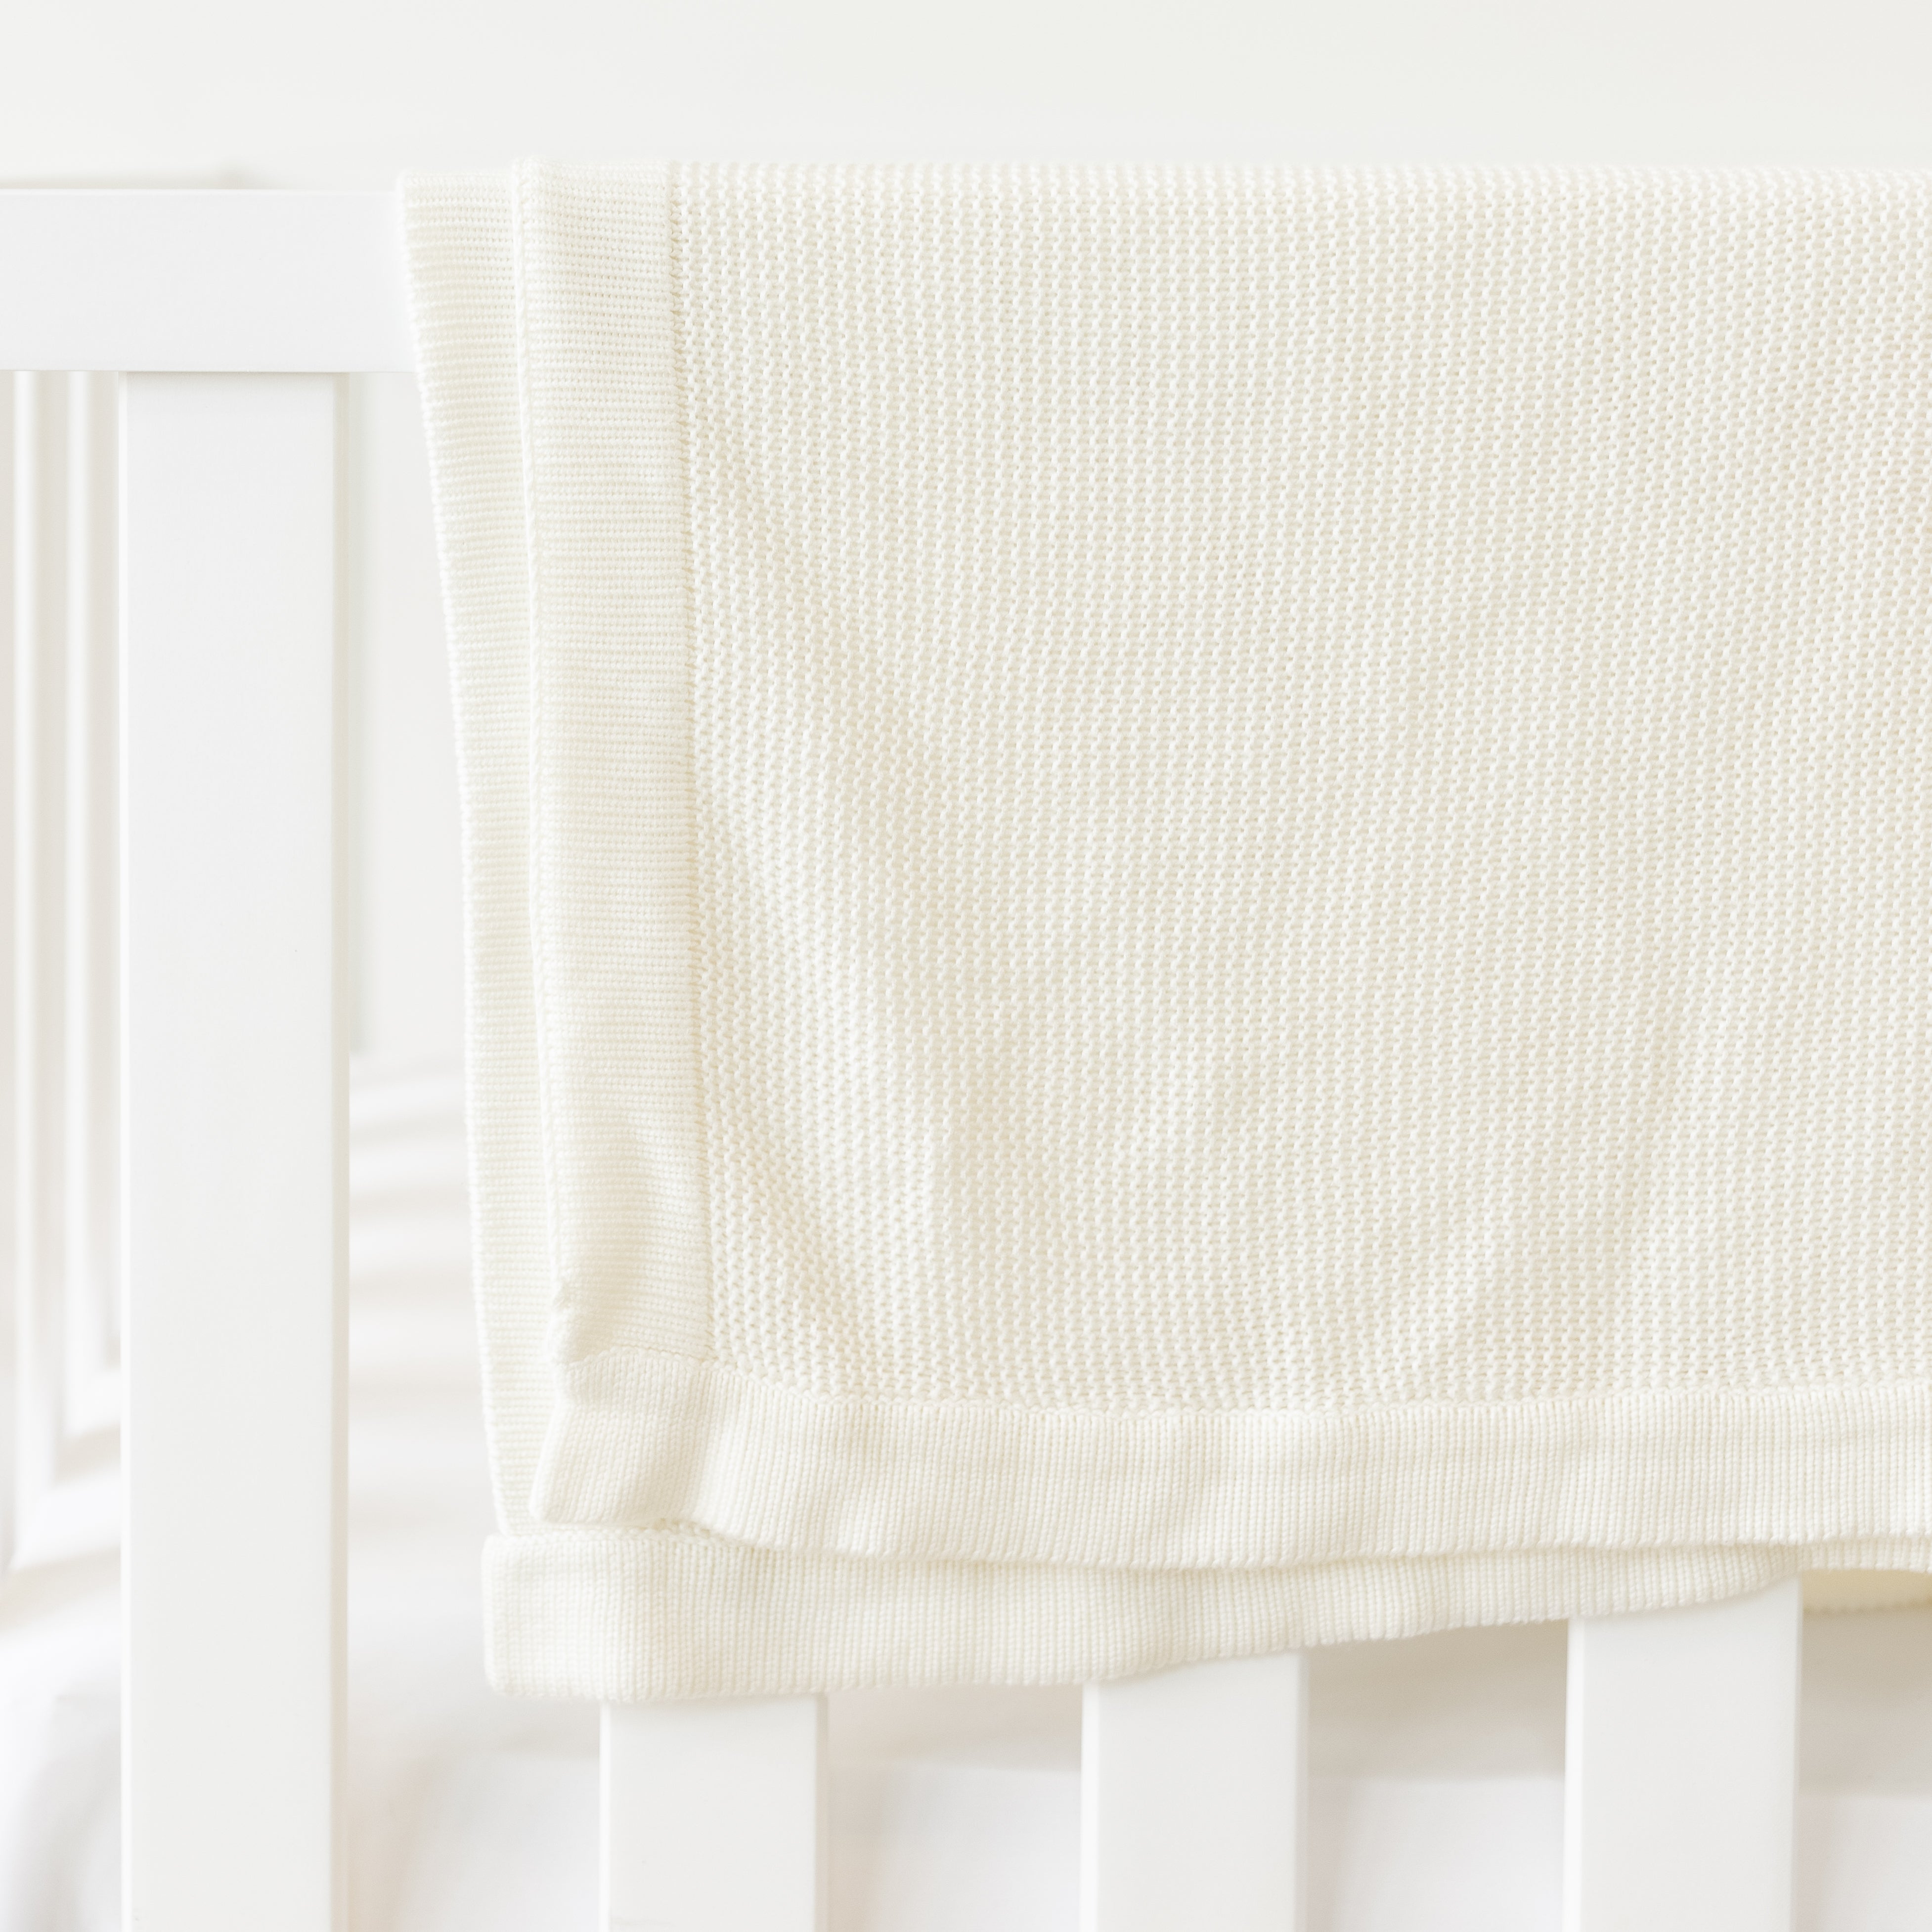 Ivory Cloud Knit Baby Blanket draped over crib |Color:Ivory